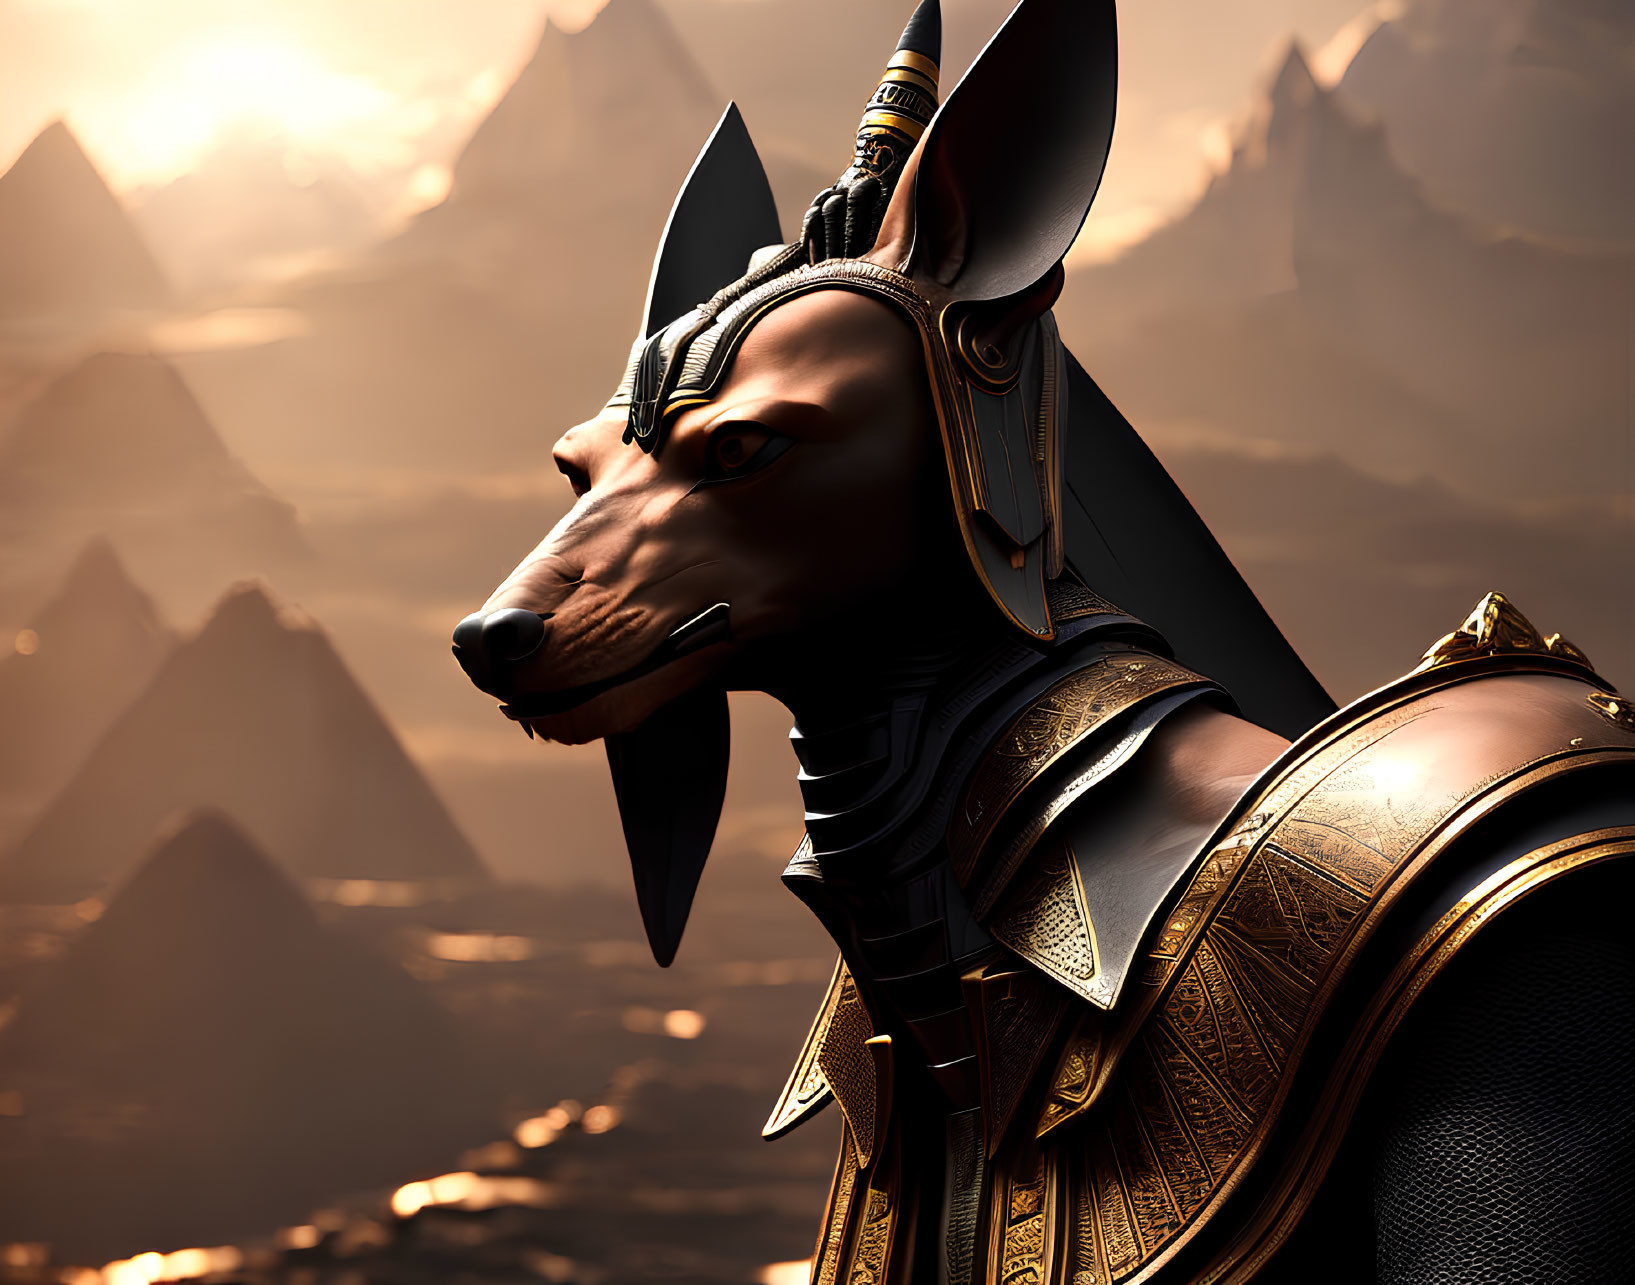 Ancient Egyptian god Anubis digital art with golden armor and mountains